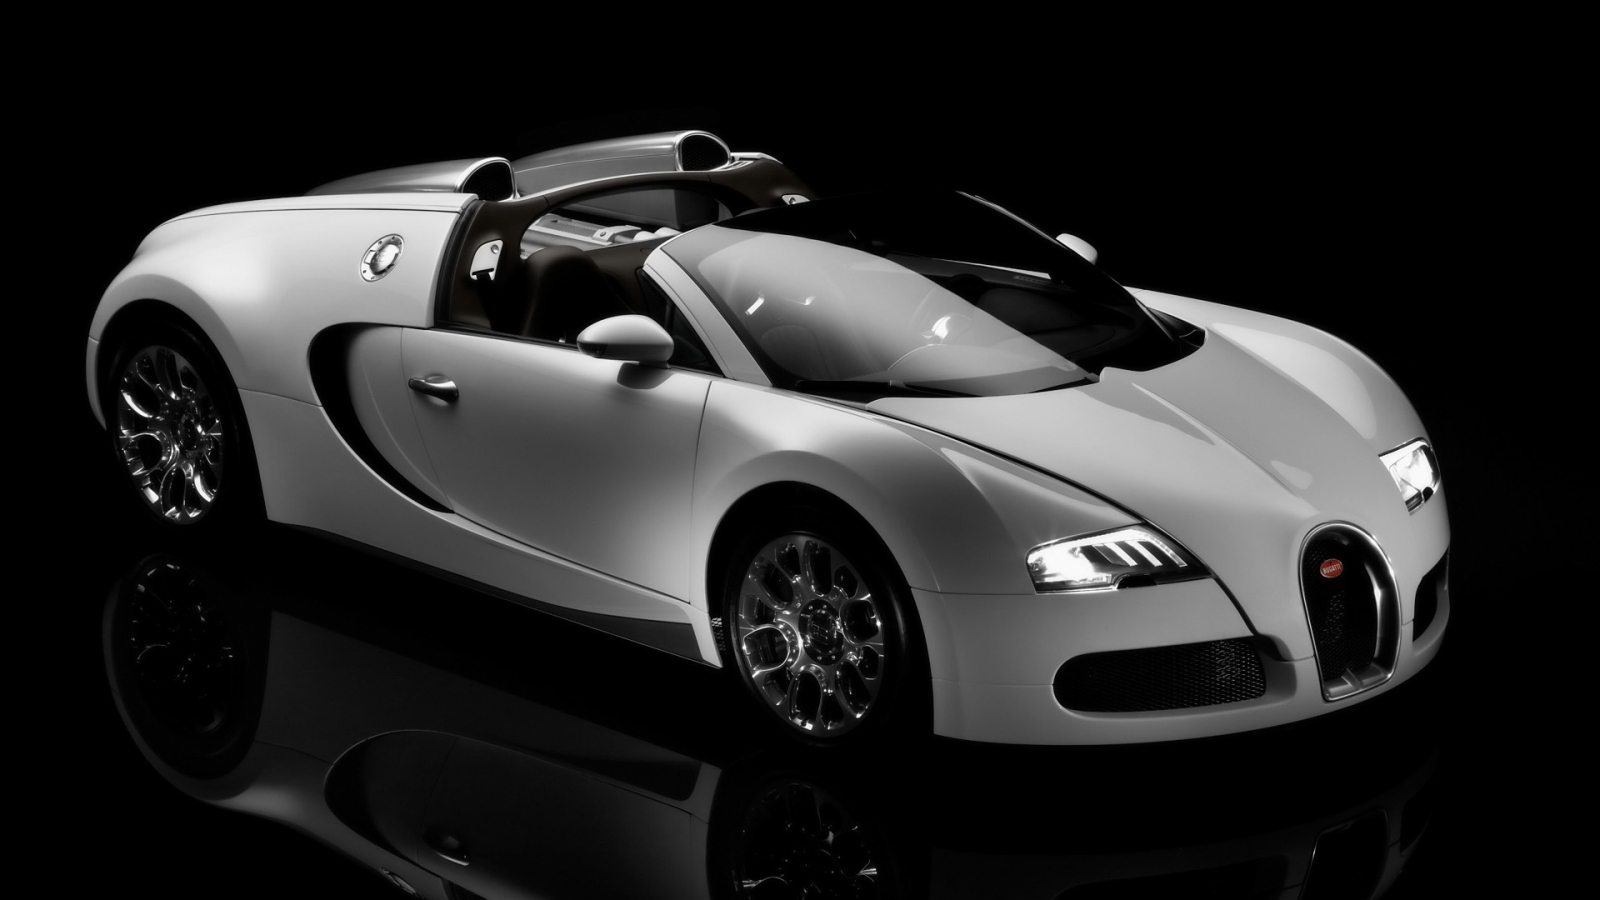 Bugatti Veyron 16.4 Grand Sport Production 2009 - Studio Front And Side for 1600 x 900 HDTV resolution